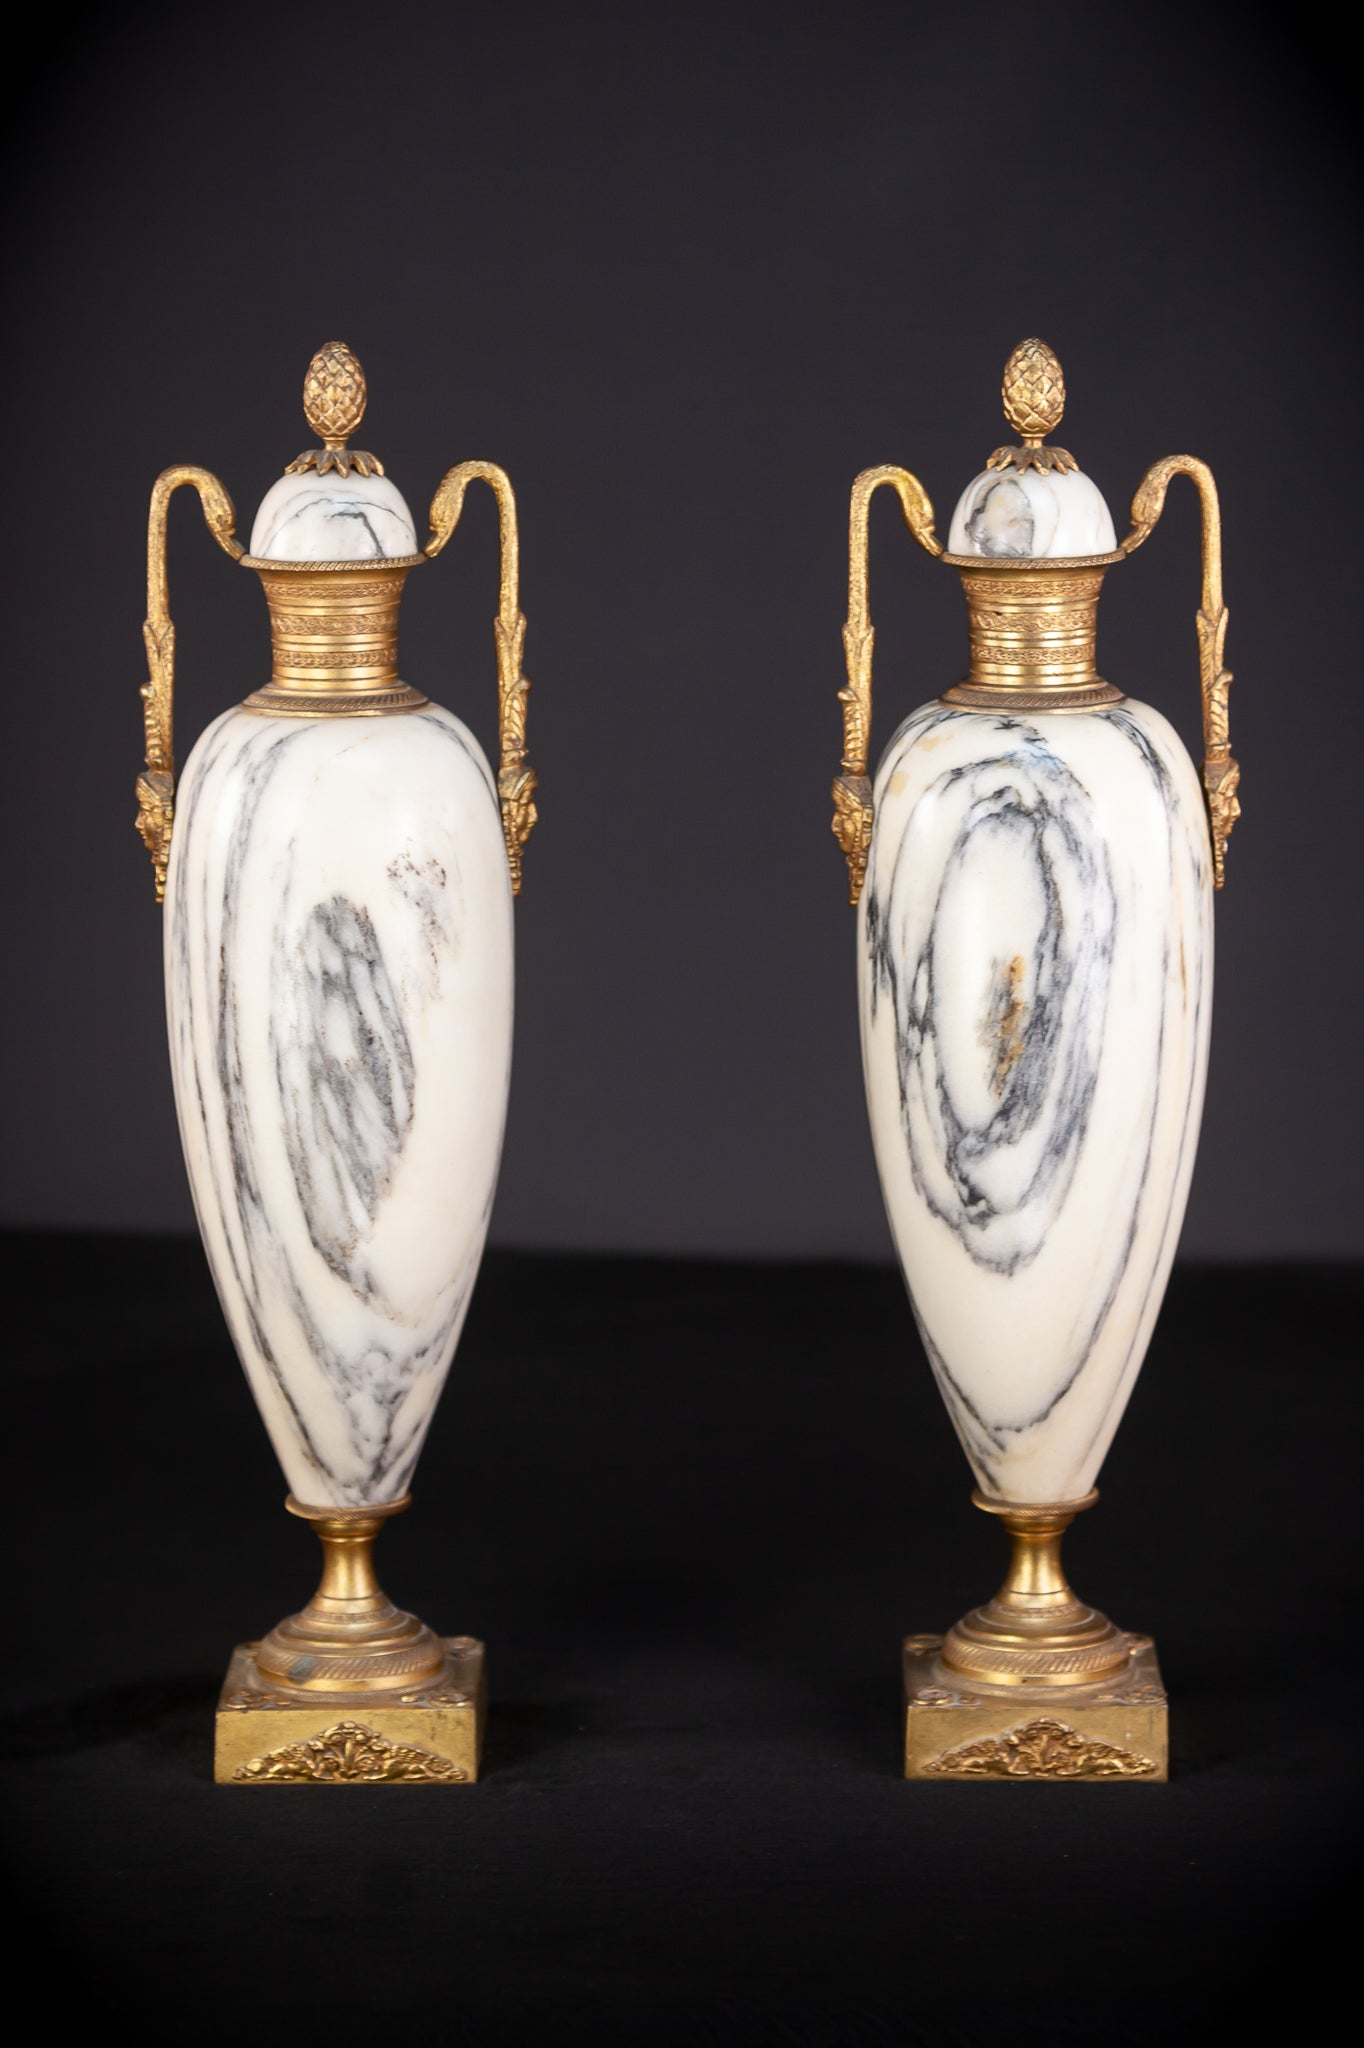 Pair of White Marble and Gilt Bronze Urns / Cassolettes | 1800s Antique | 14.2" / 46 cm